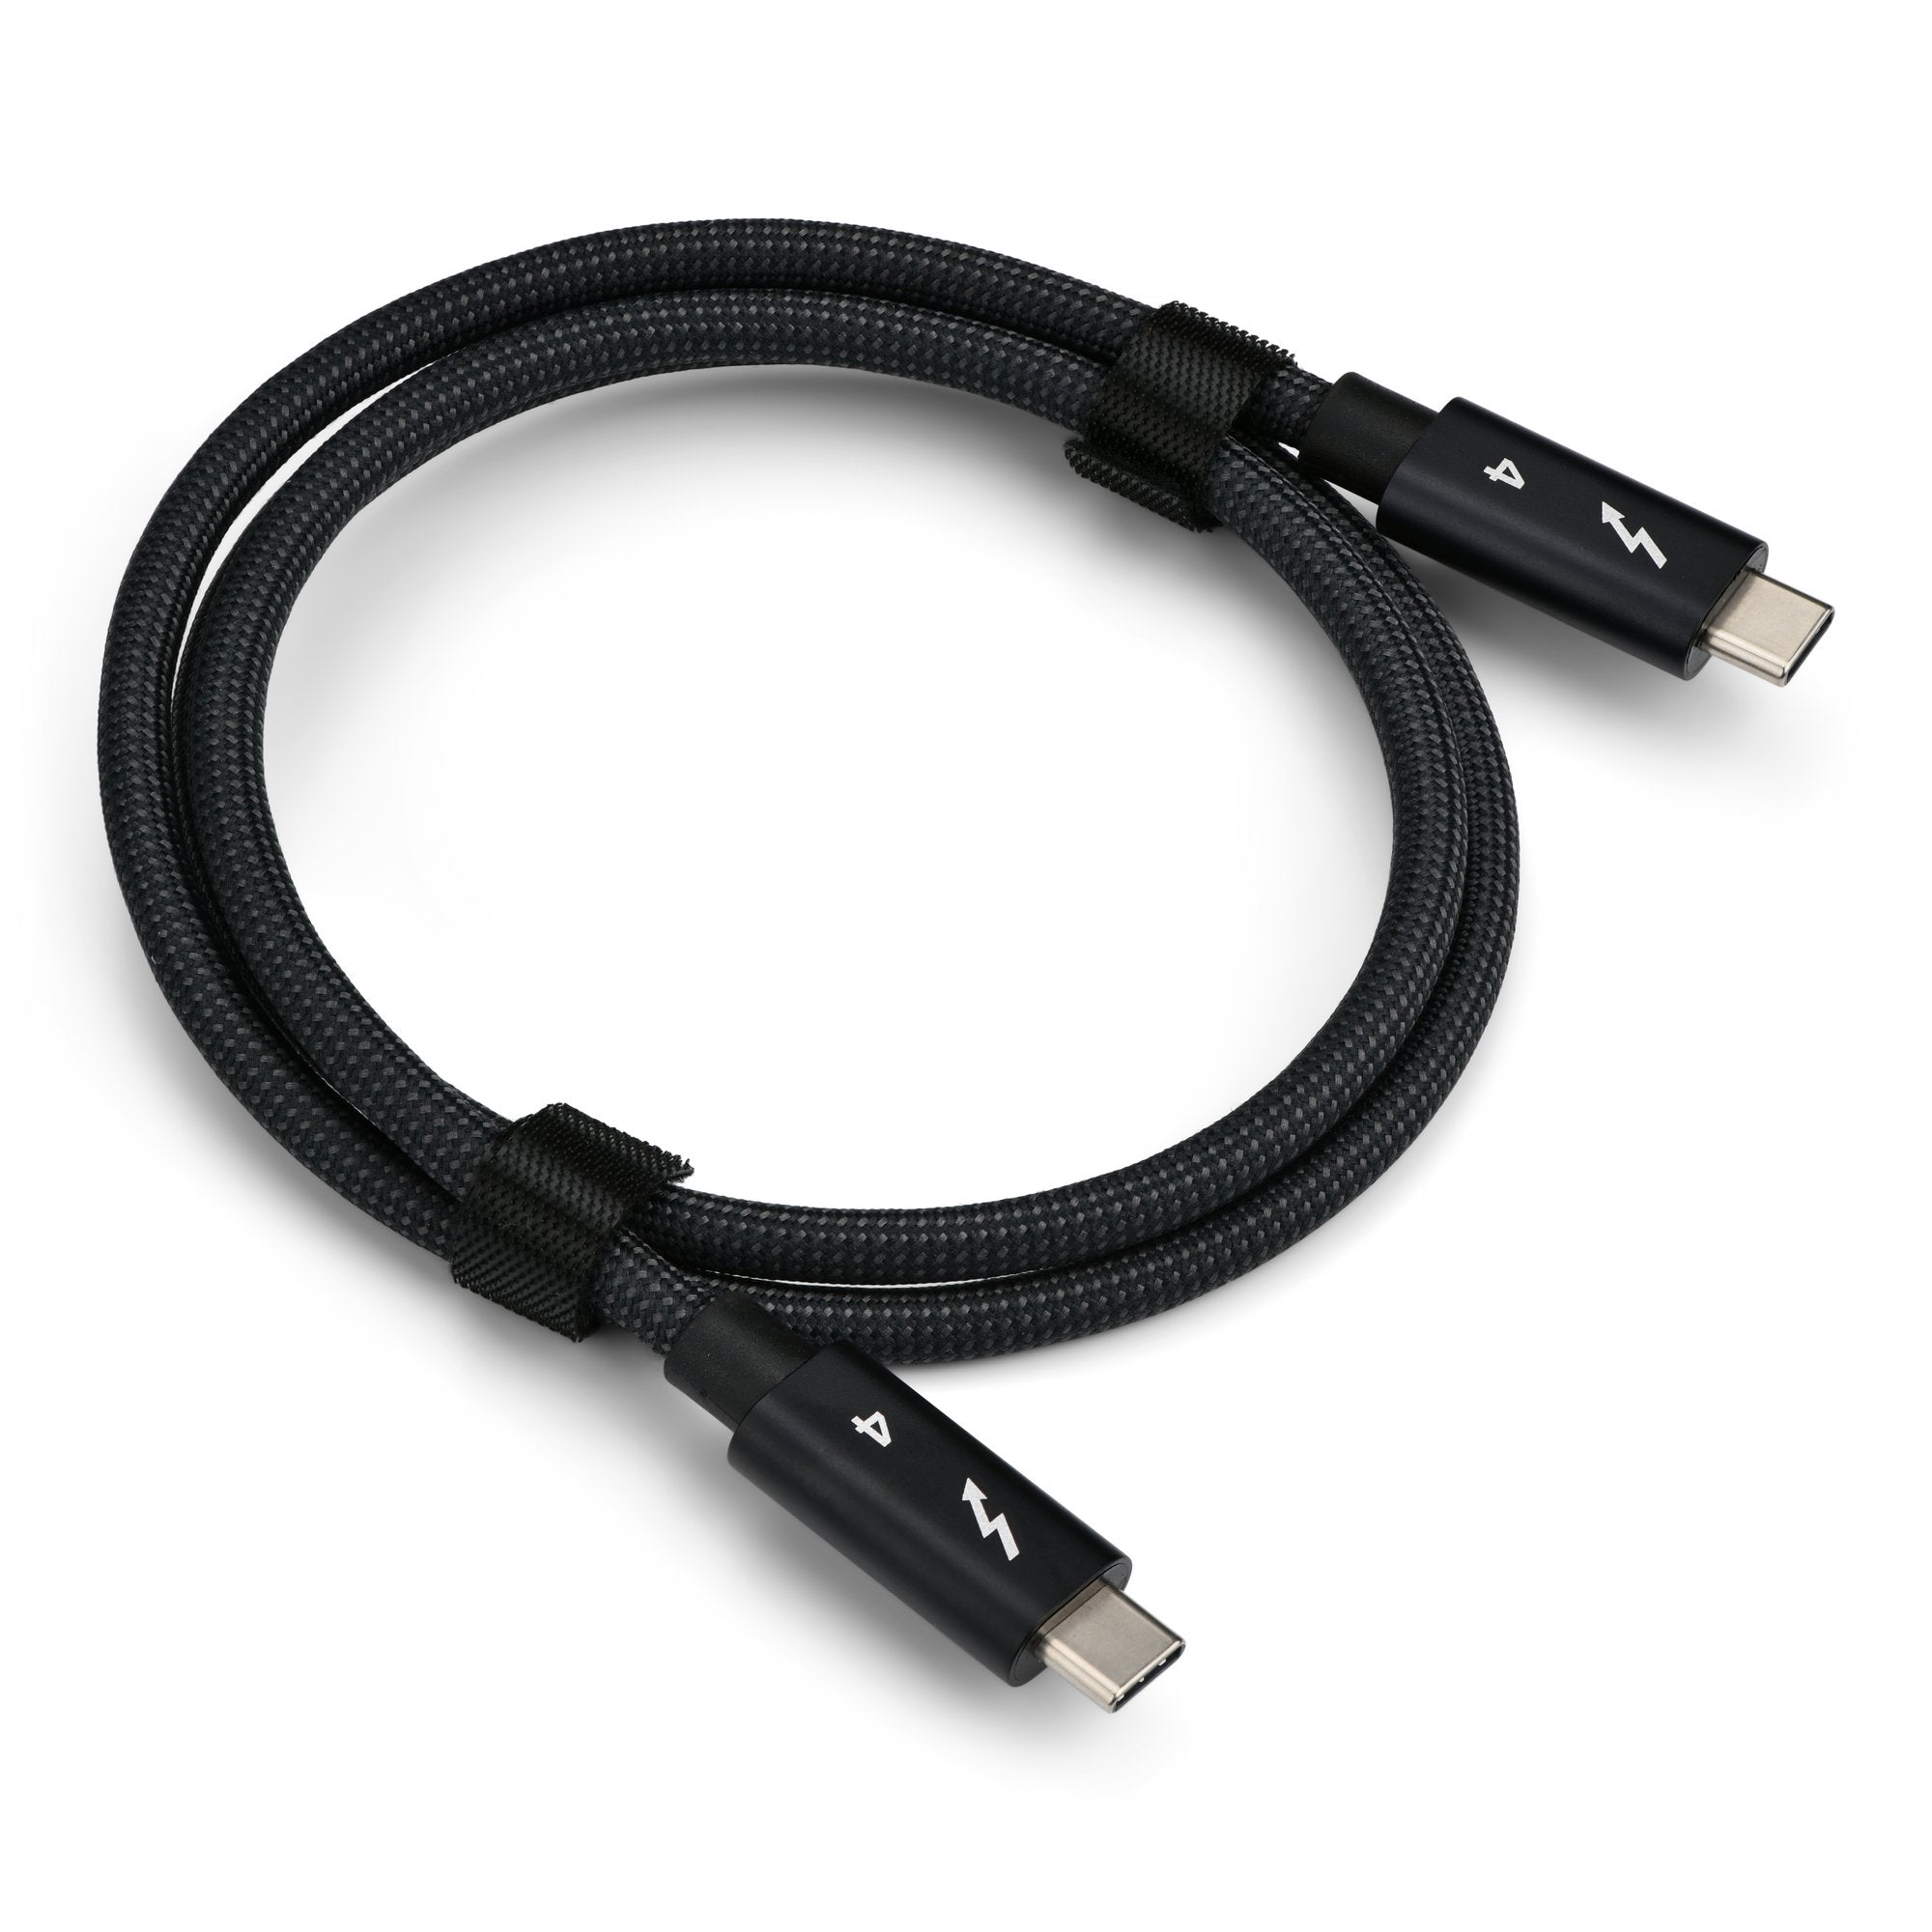 Thunderbolt 4 (USB-C) Cable .8 Meter